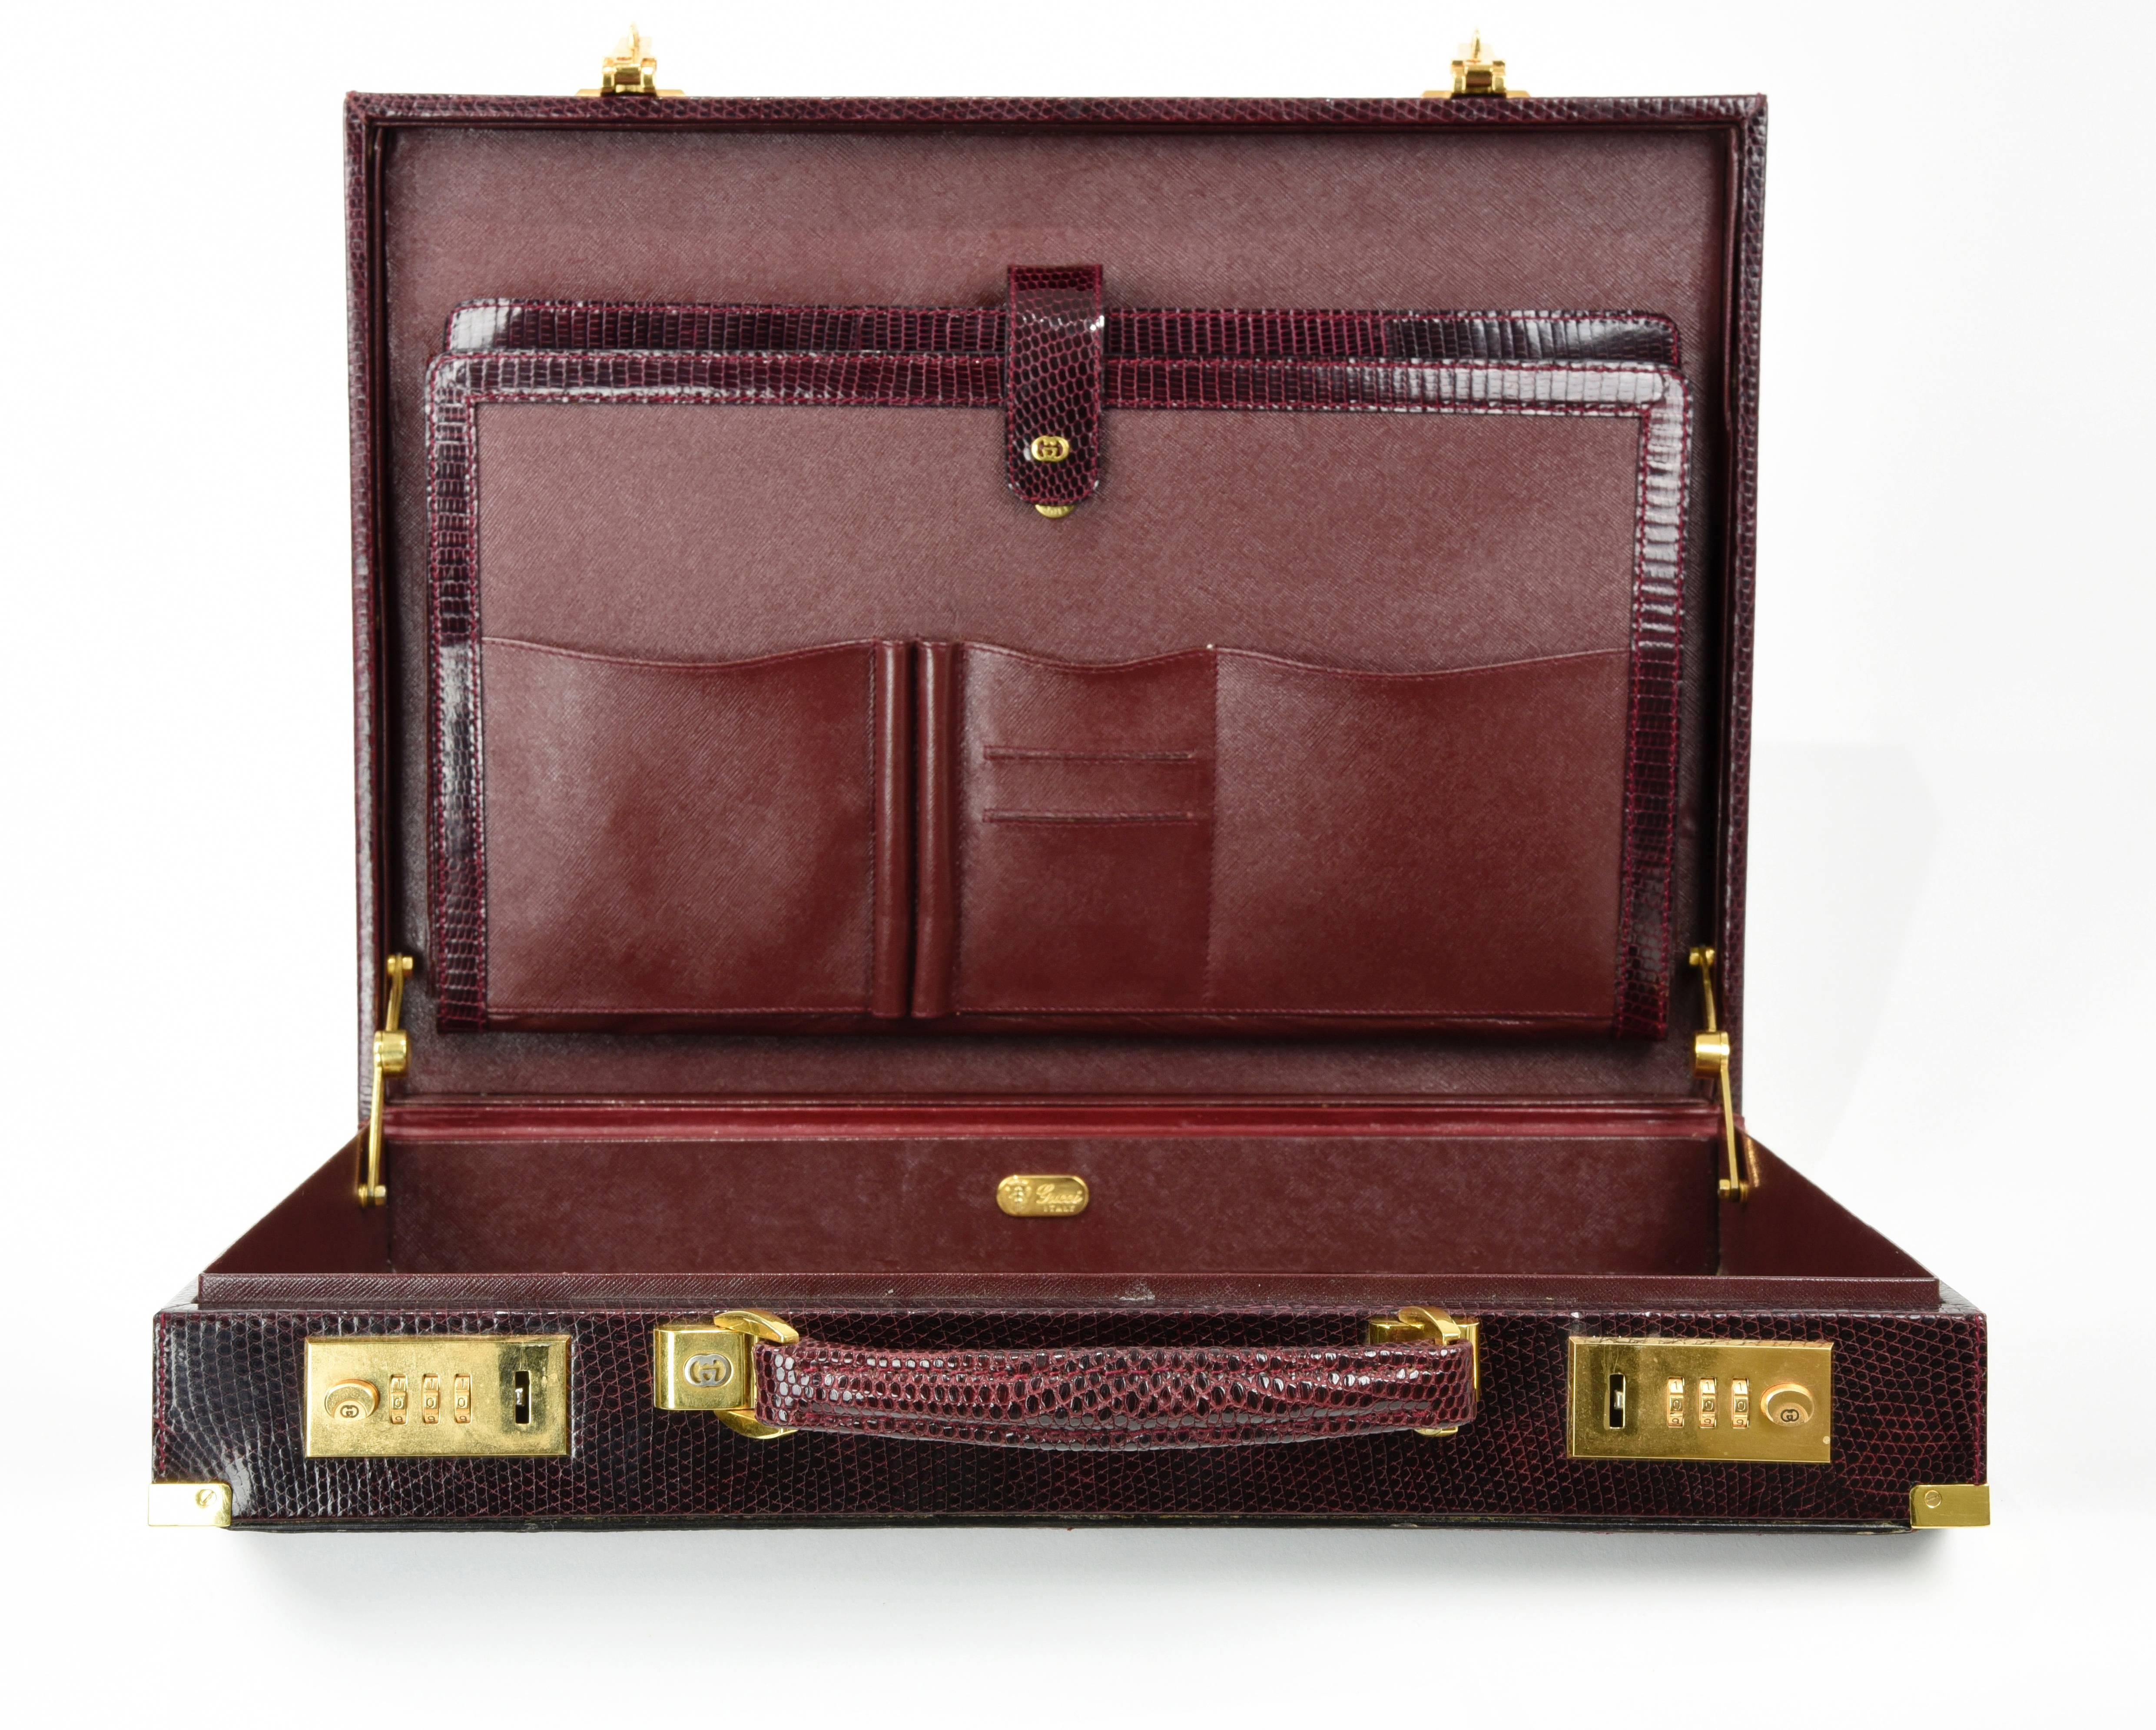 A most handsome substantial (6 pounds) lizard briefcase with gorgeous gold hardware including 4 corner guards, heavy duty hinges,  handle hardware,and locking mechanism.  Inside has two14.5" pouches and 5 compartments for pens, cards and note